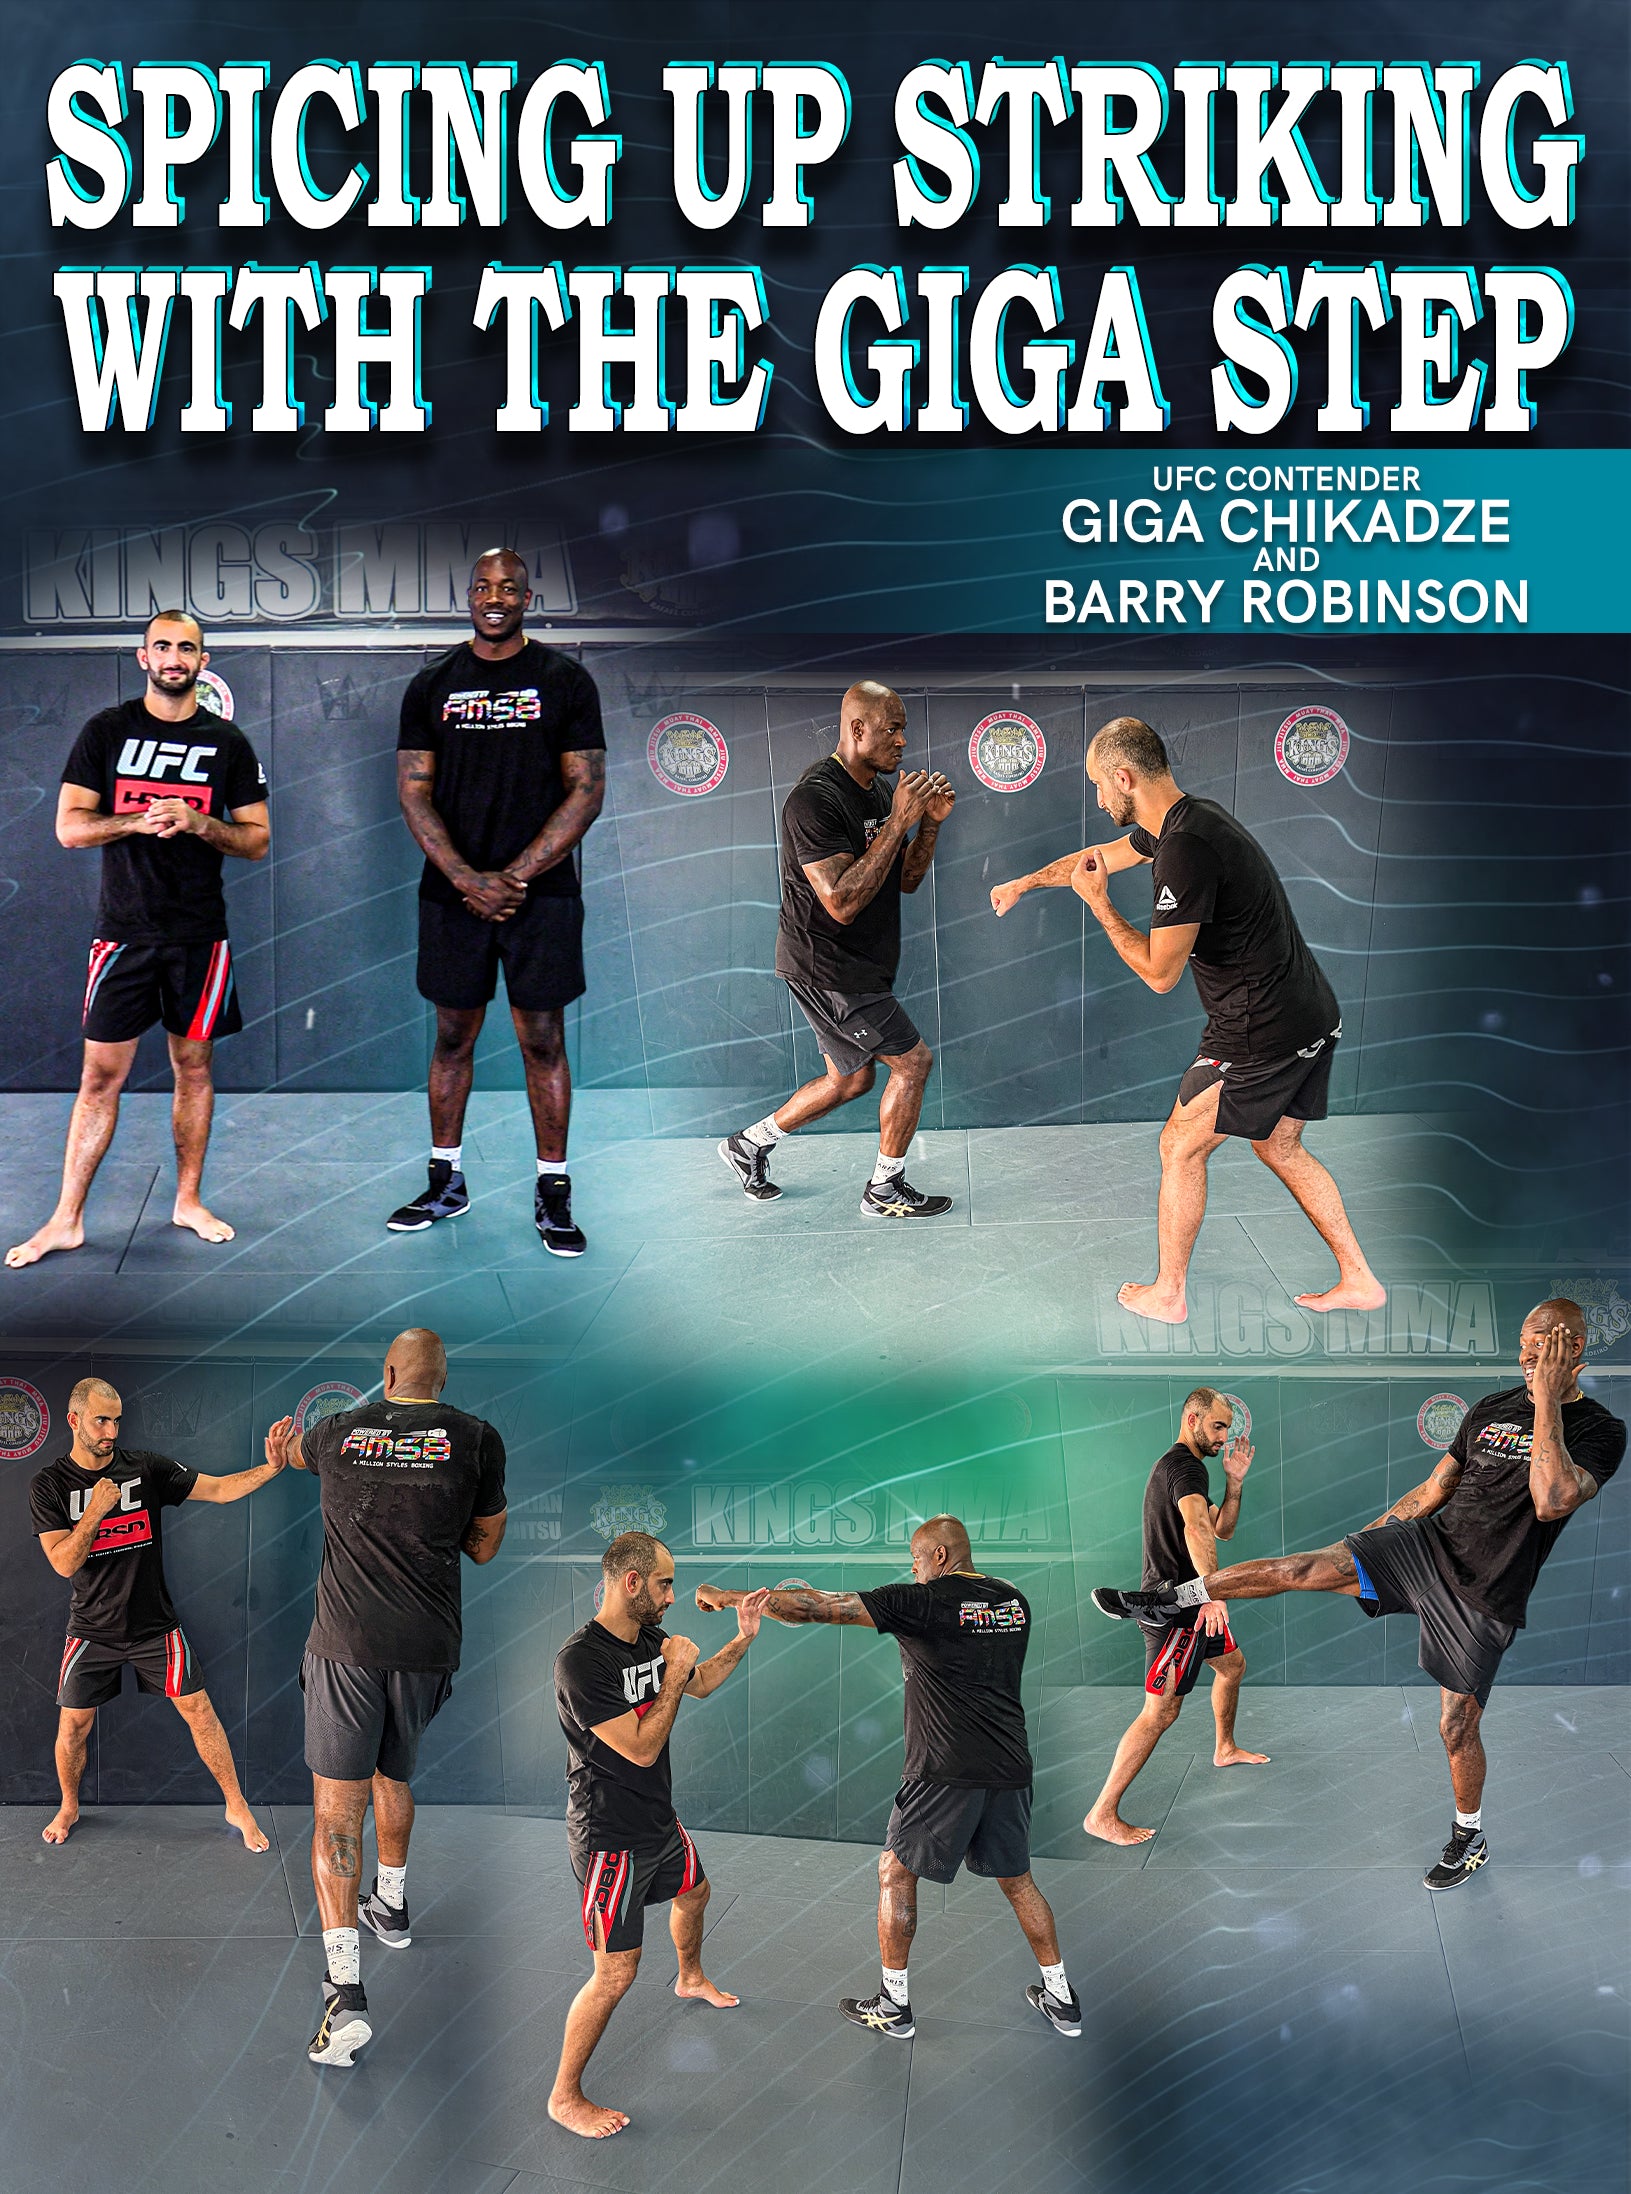 Spicing Up Striking With The Giga Step by Giga Chikadze and Barry Robi